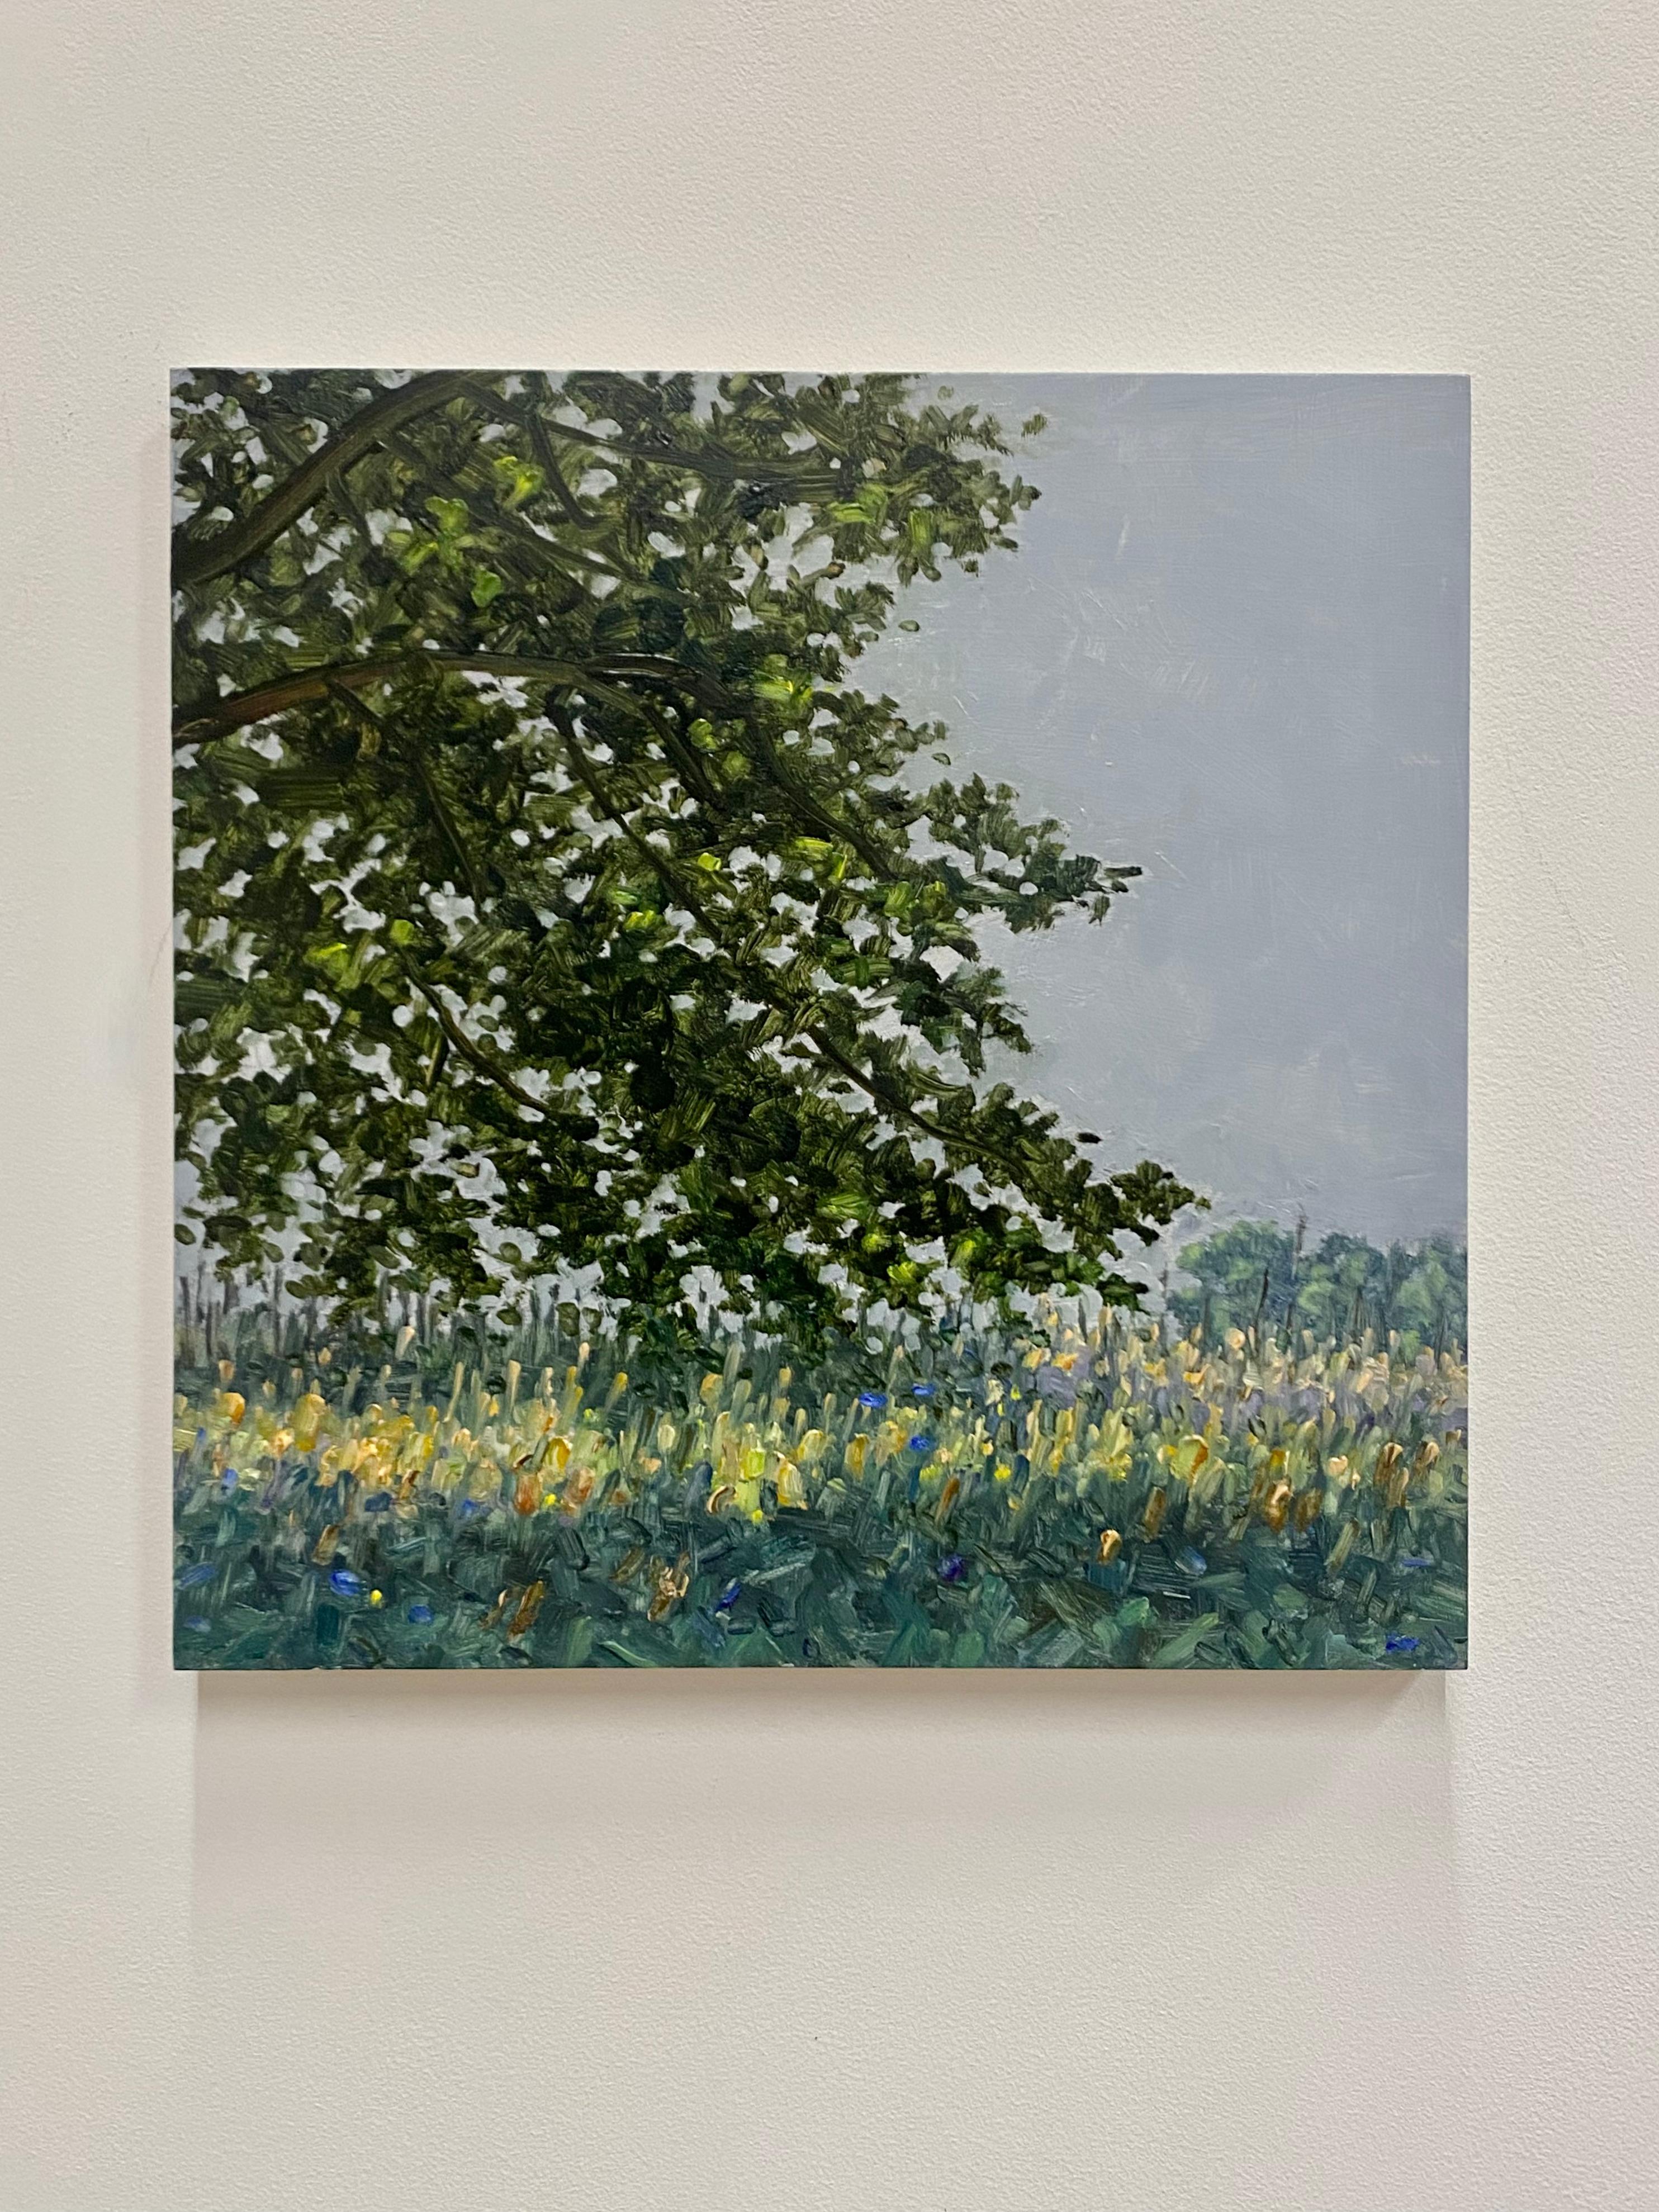 A peaceful outdoor scene in summer of delicately painted violet blue flowers in a grassy field beneath a tree with dark green leaves, beautifully capturing the idyllic feel of a field of wildflowers in July. Signed, dated and titled on verso.

The